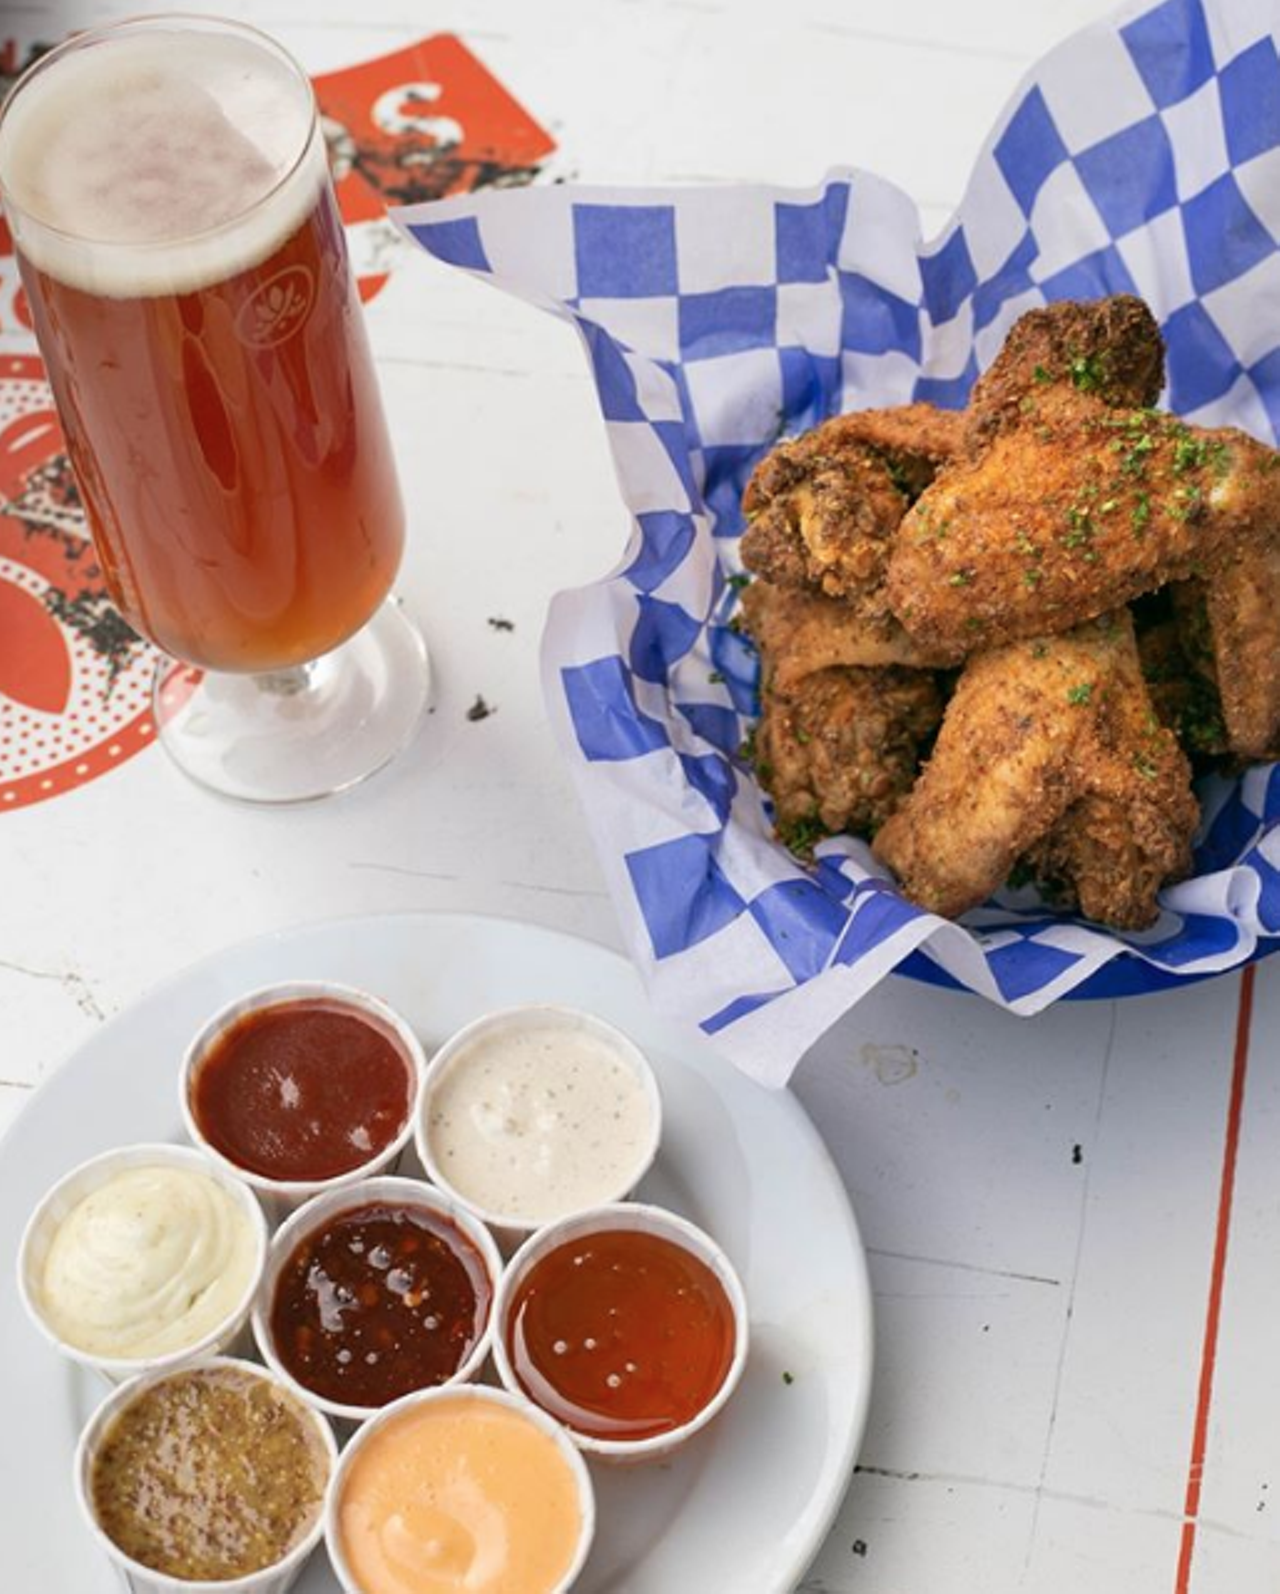 Southerleigh Fine Food and Brewery
136 E Grayson St #120, (210) 455-5701, southerleigh.com
For wings and local brews, head to Southerleigh for its daily happy hour from 3 to 5 p.m. The restaurant offers $1 pressure-fried wings and $2 off all beers, wine and punches. It can’t get better than that.
Photo via Instagram / southerleigh